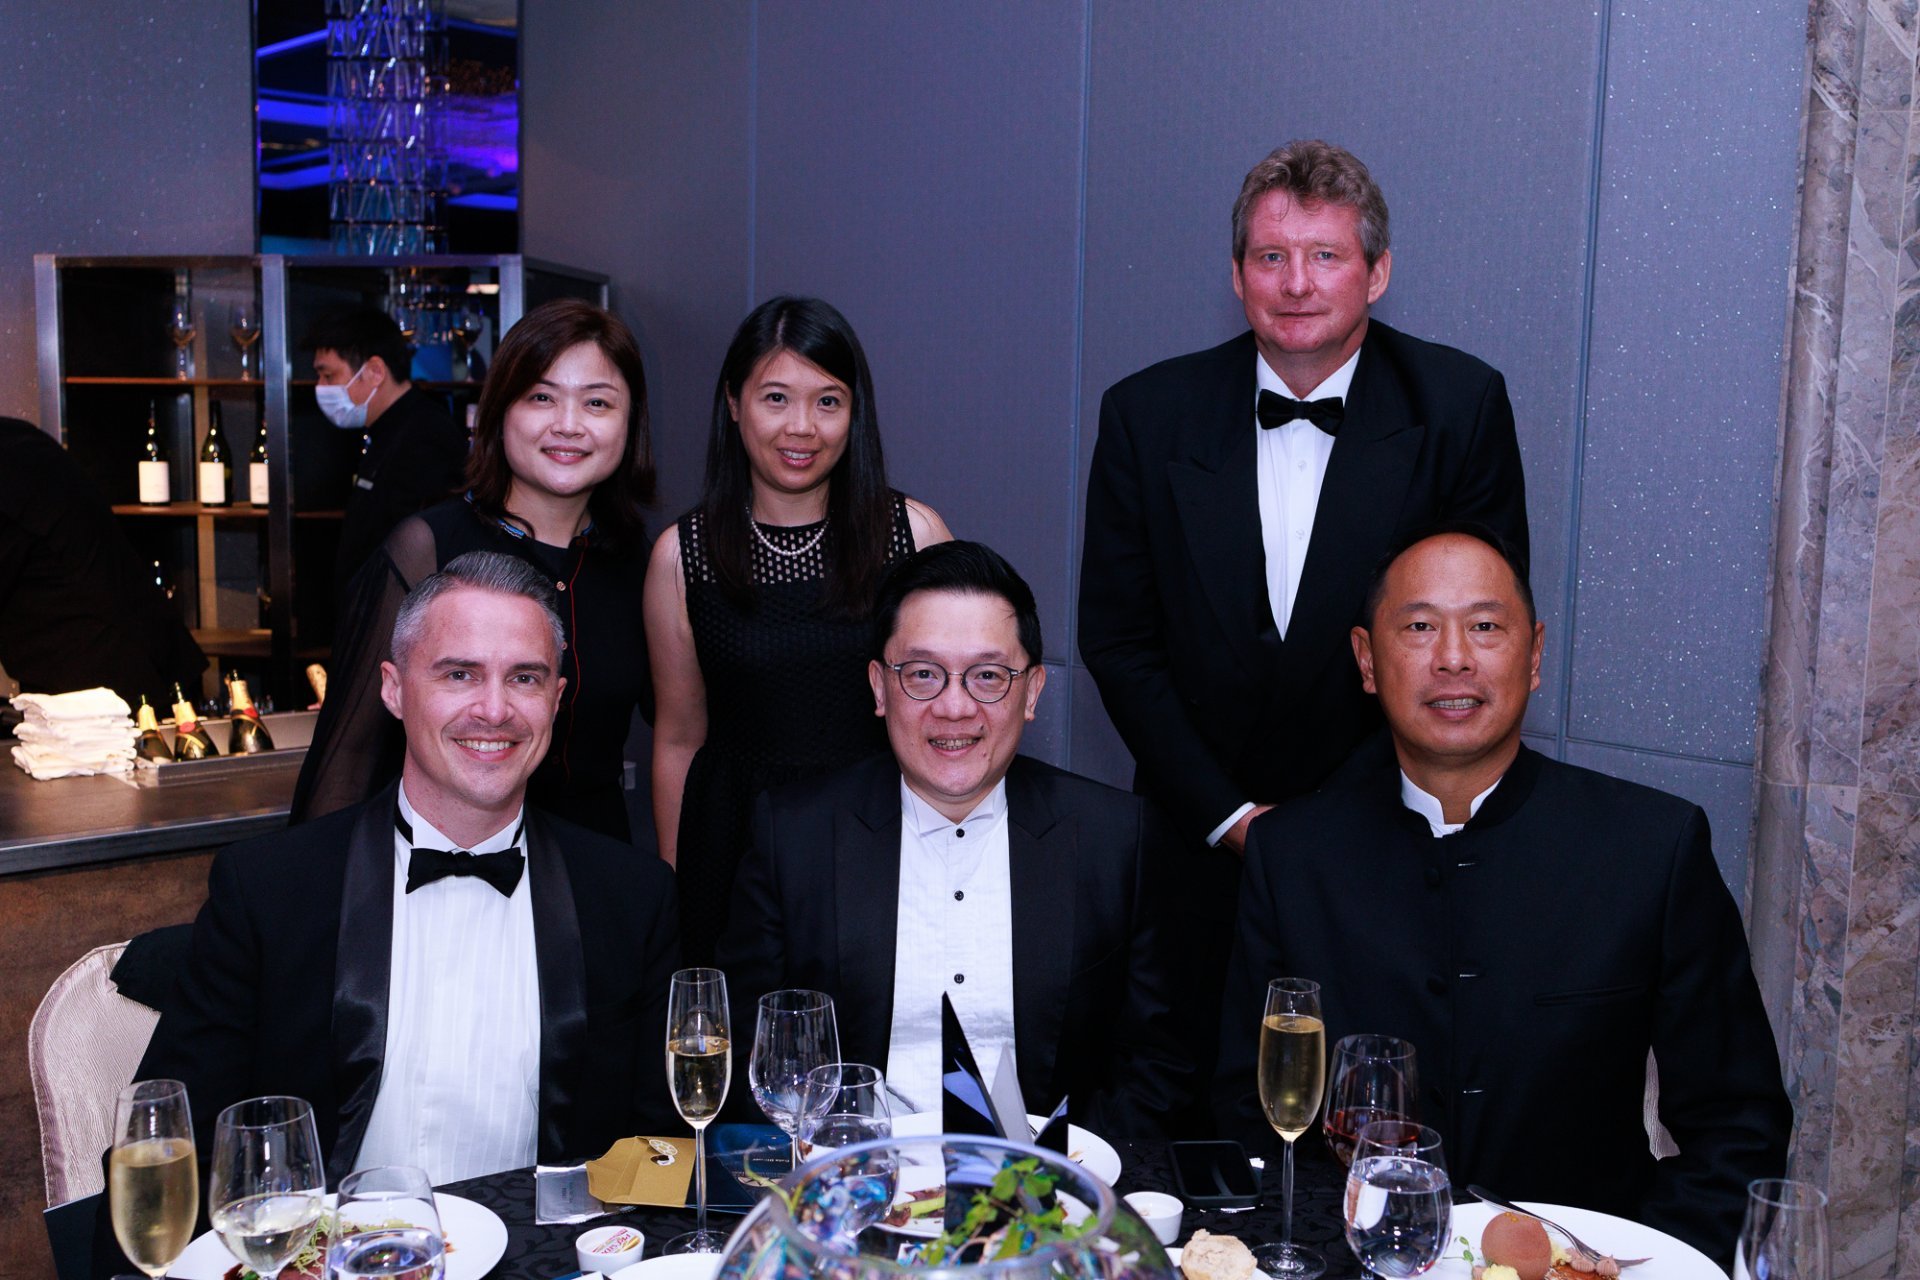 Carret Private and guests at the 11th Awards for Distinction